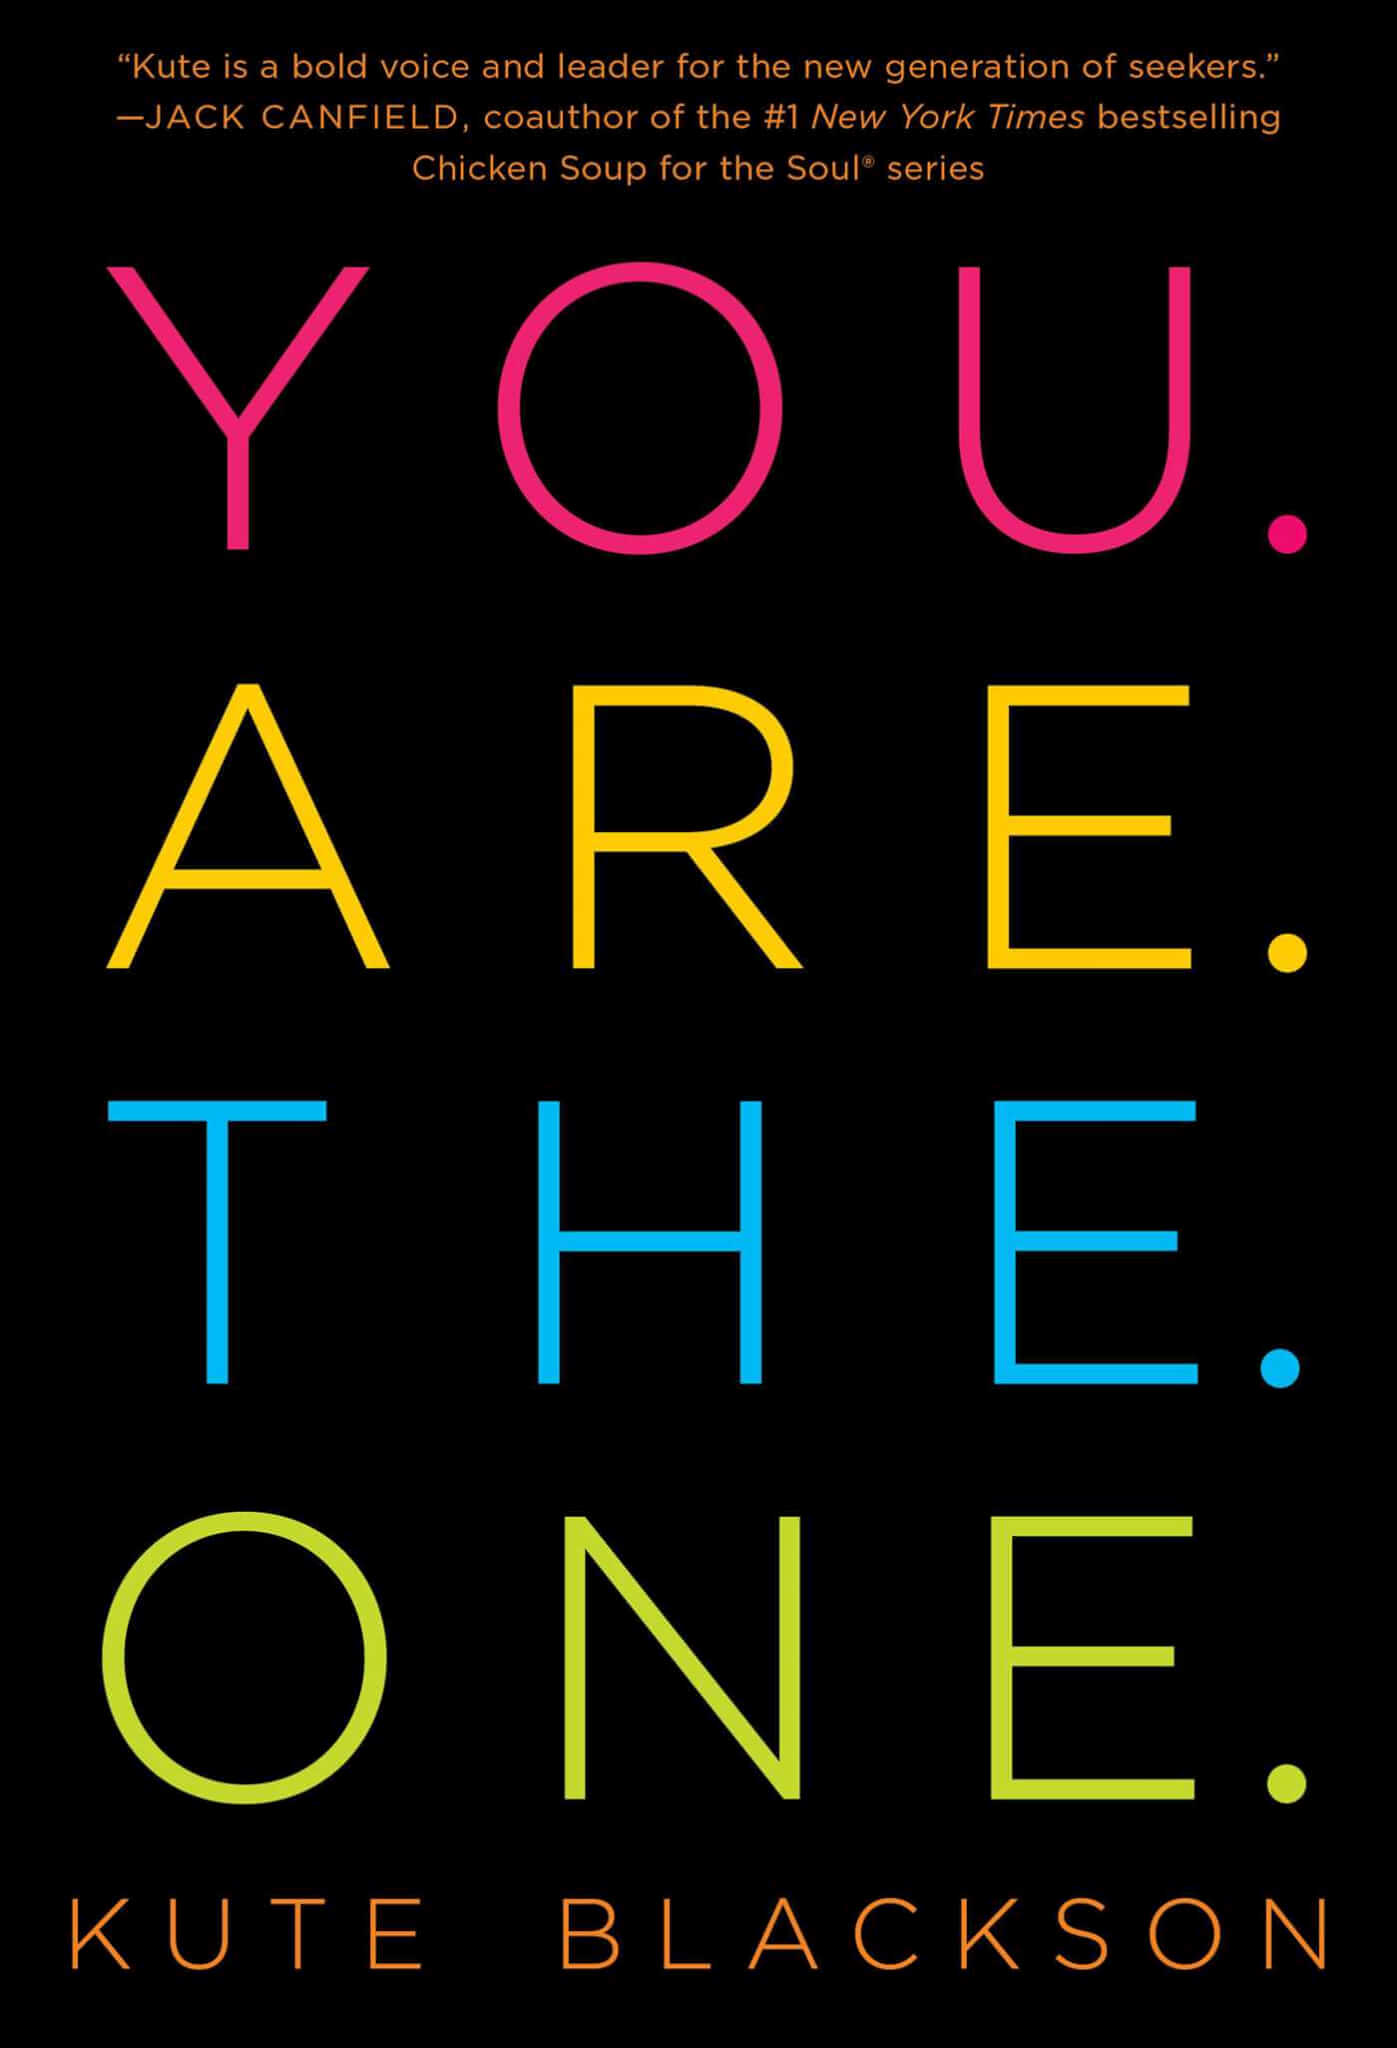 Book Review: You. Are. The. One. by Kute Blackson